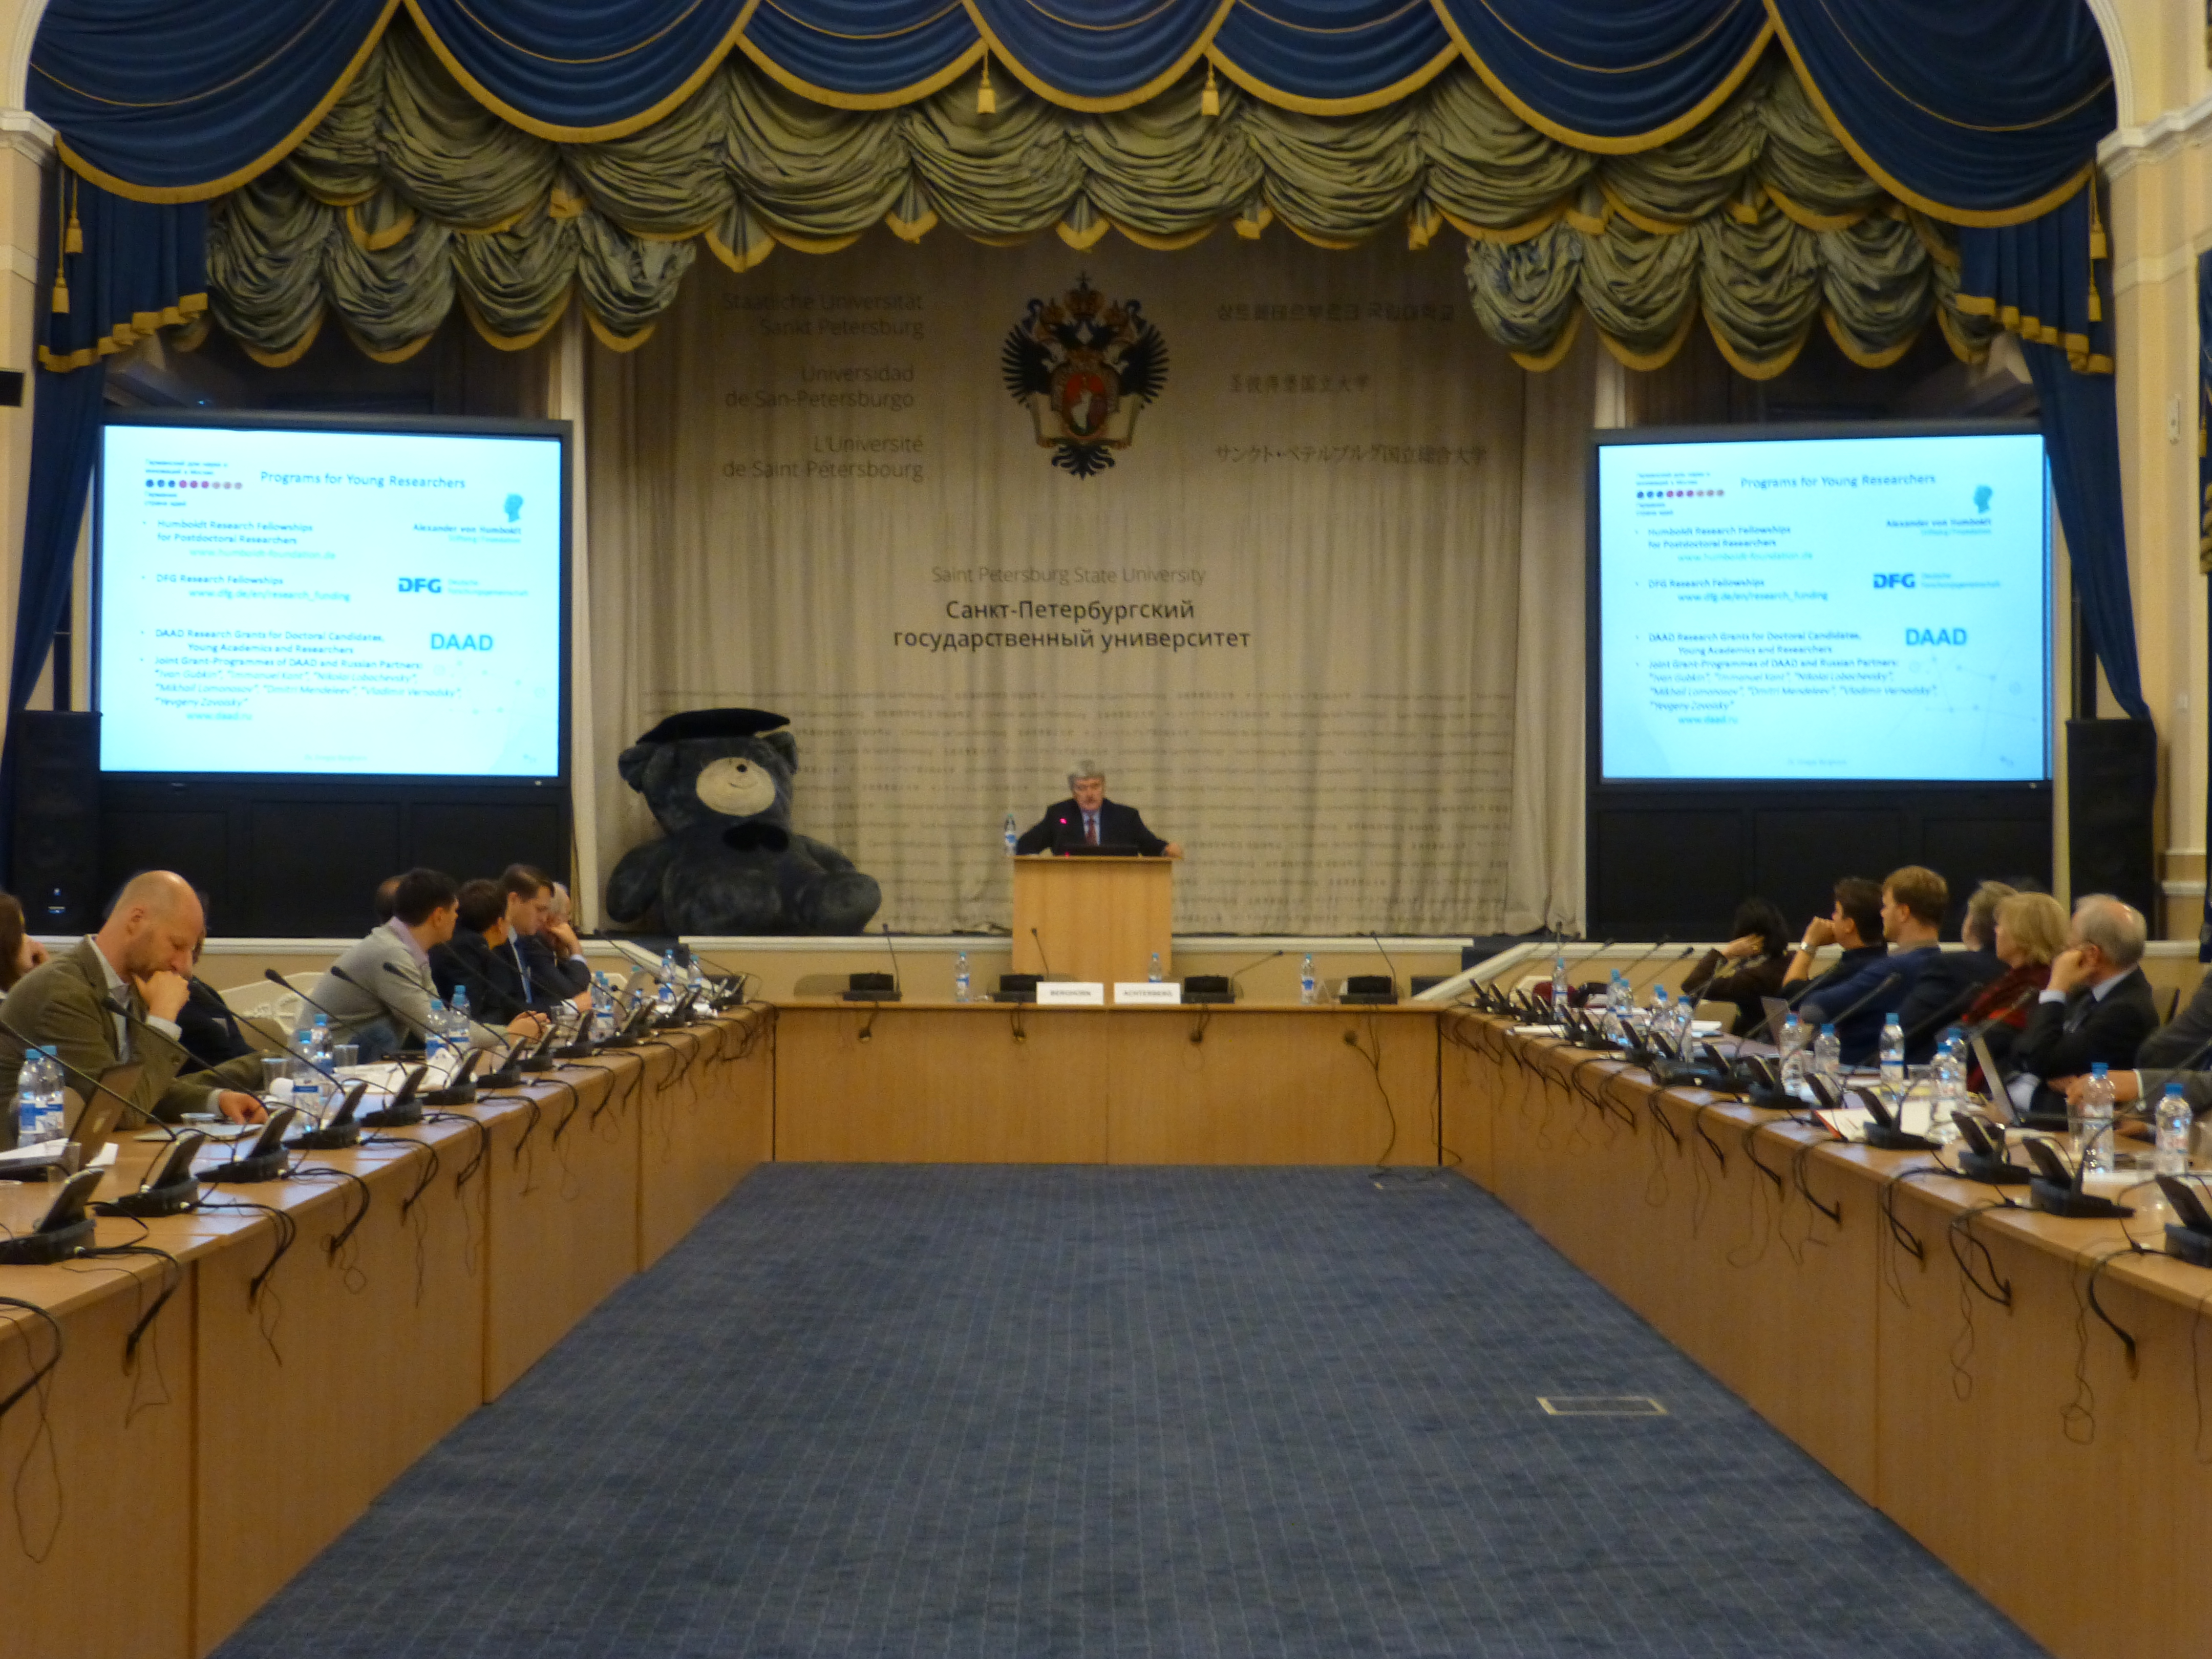 Plenary hall at the Faculty of Law